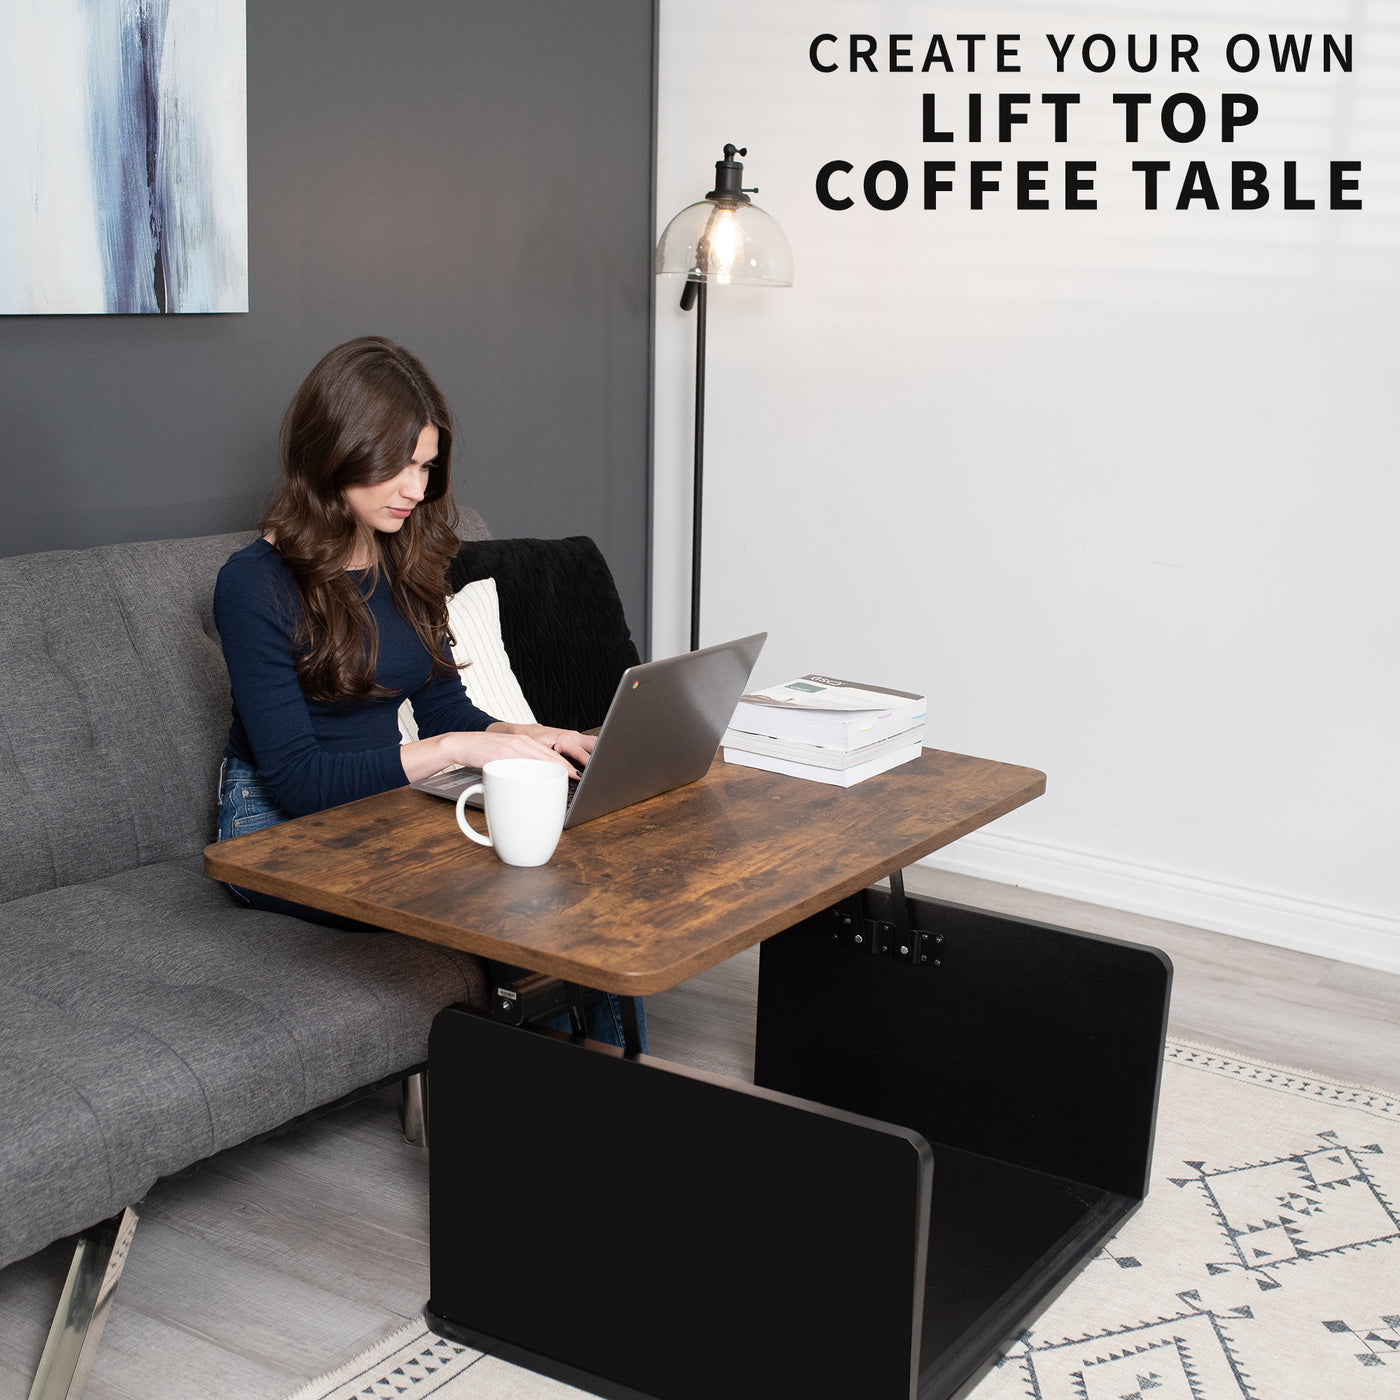 Create a lift-top coffee table to work comfortably from any room in your house.